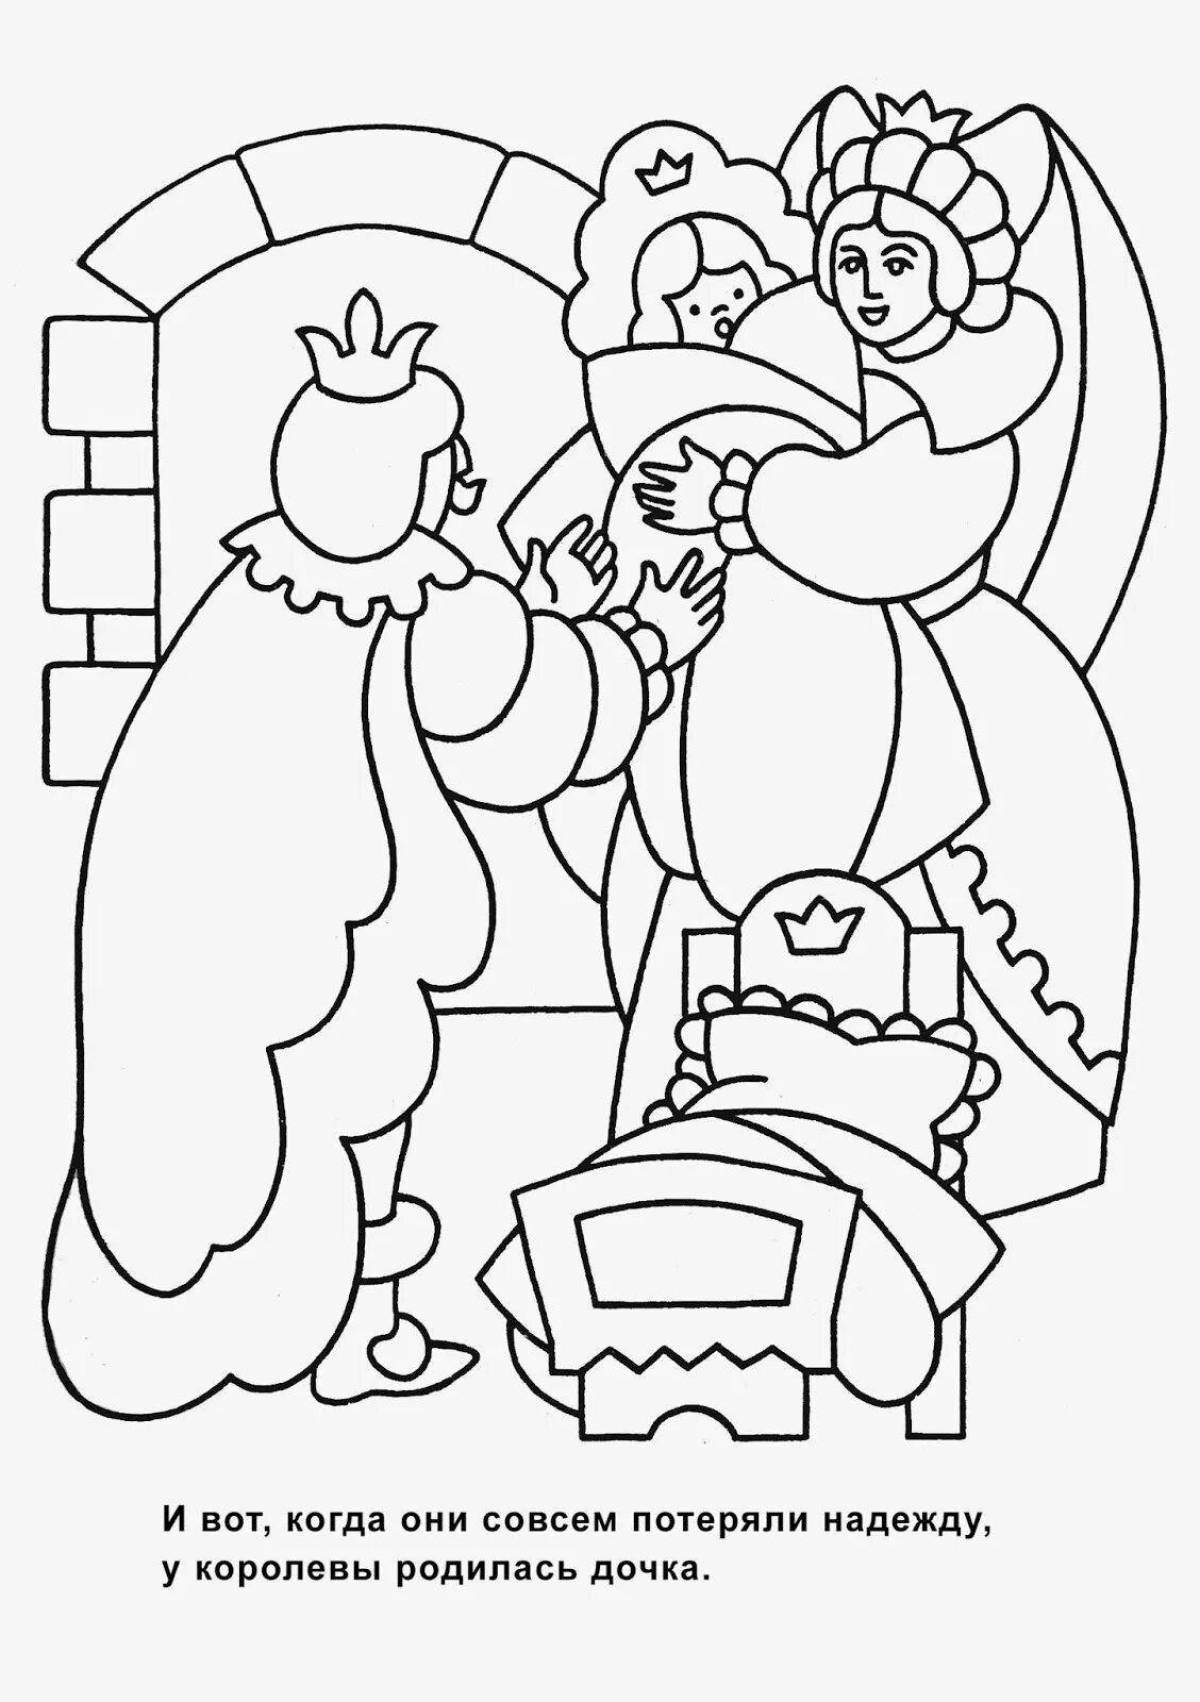 Shining coloring book from Perrault's tales